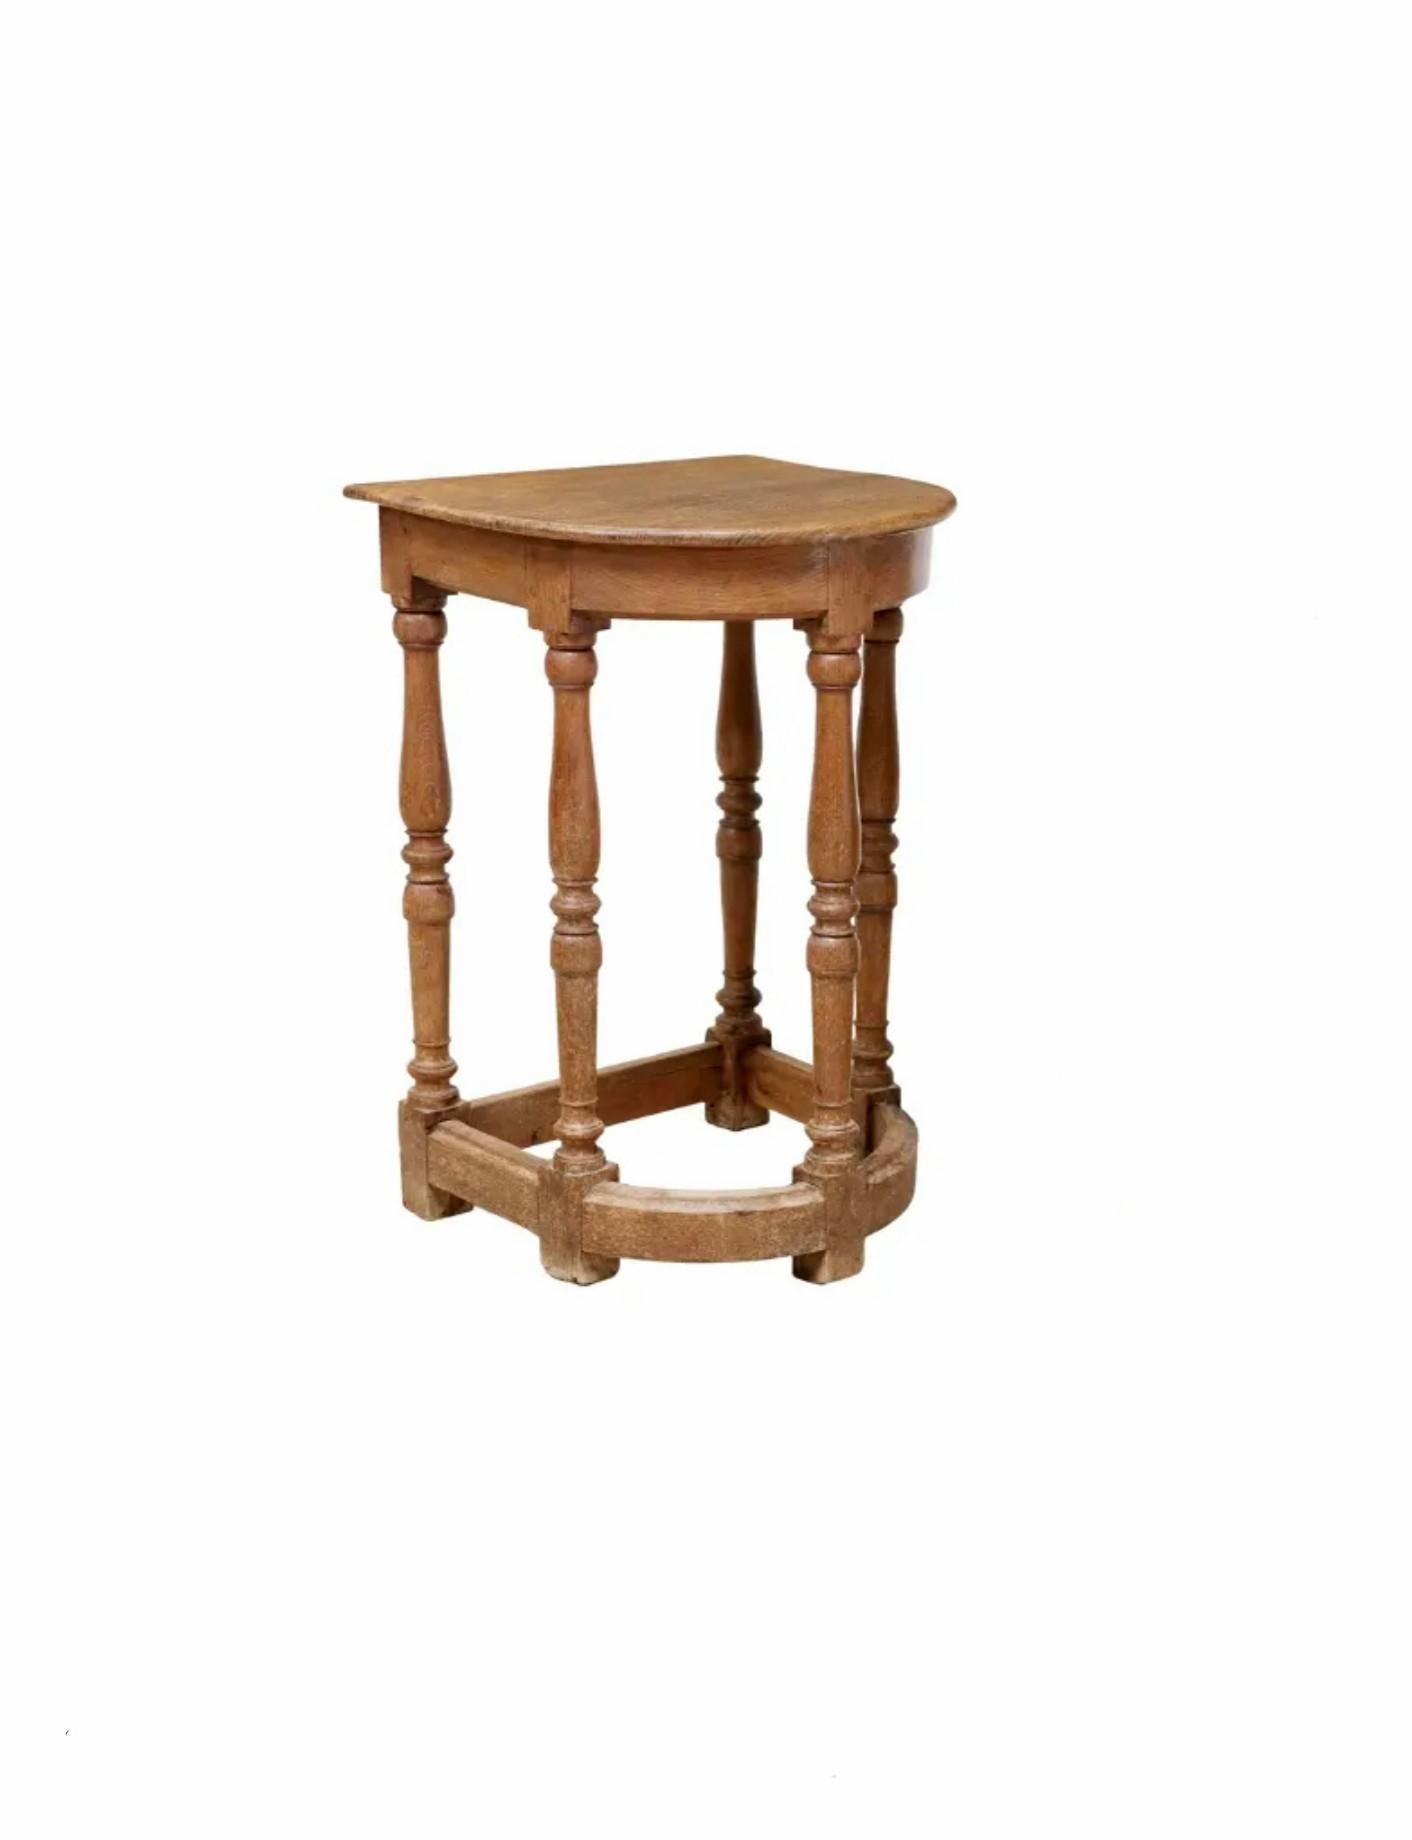 Hand-Carved Rustic 18th/19th Century Country Continental Oak Side Table For Sale